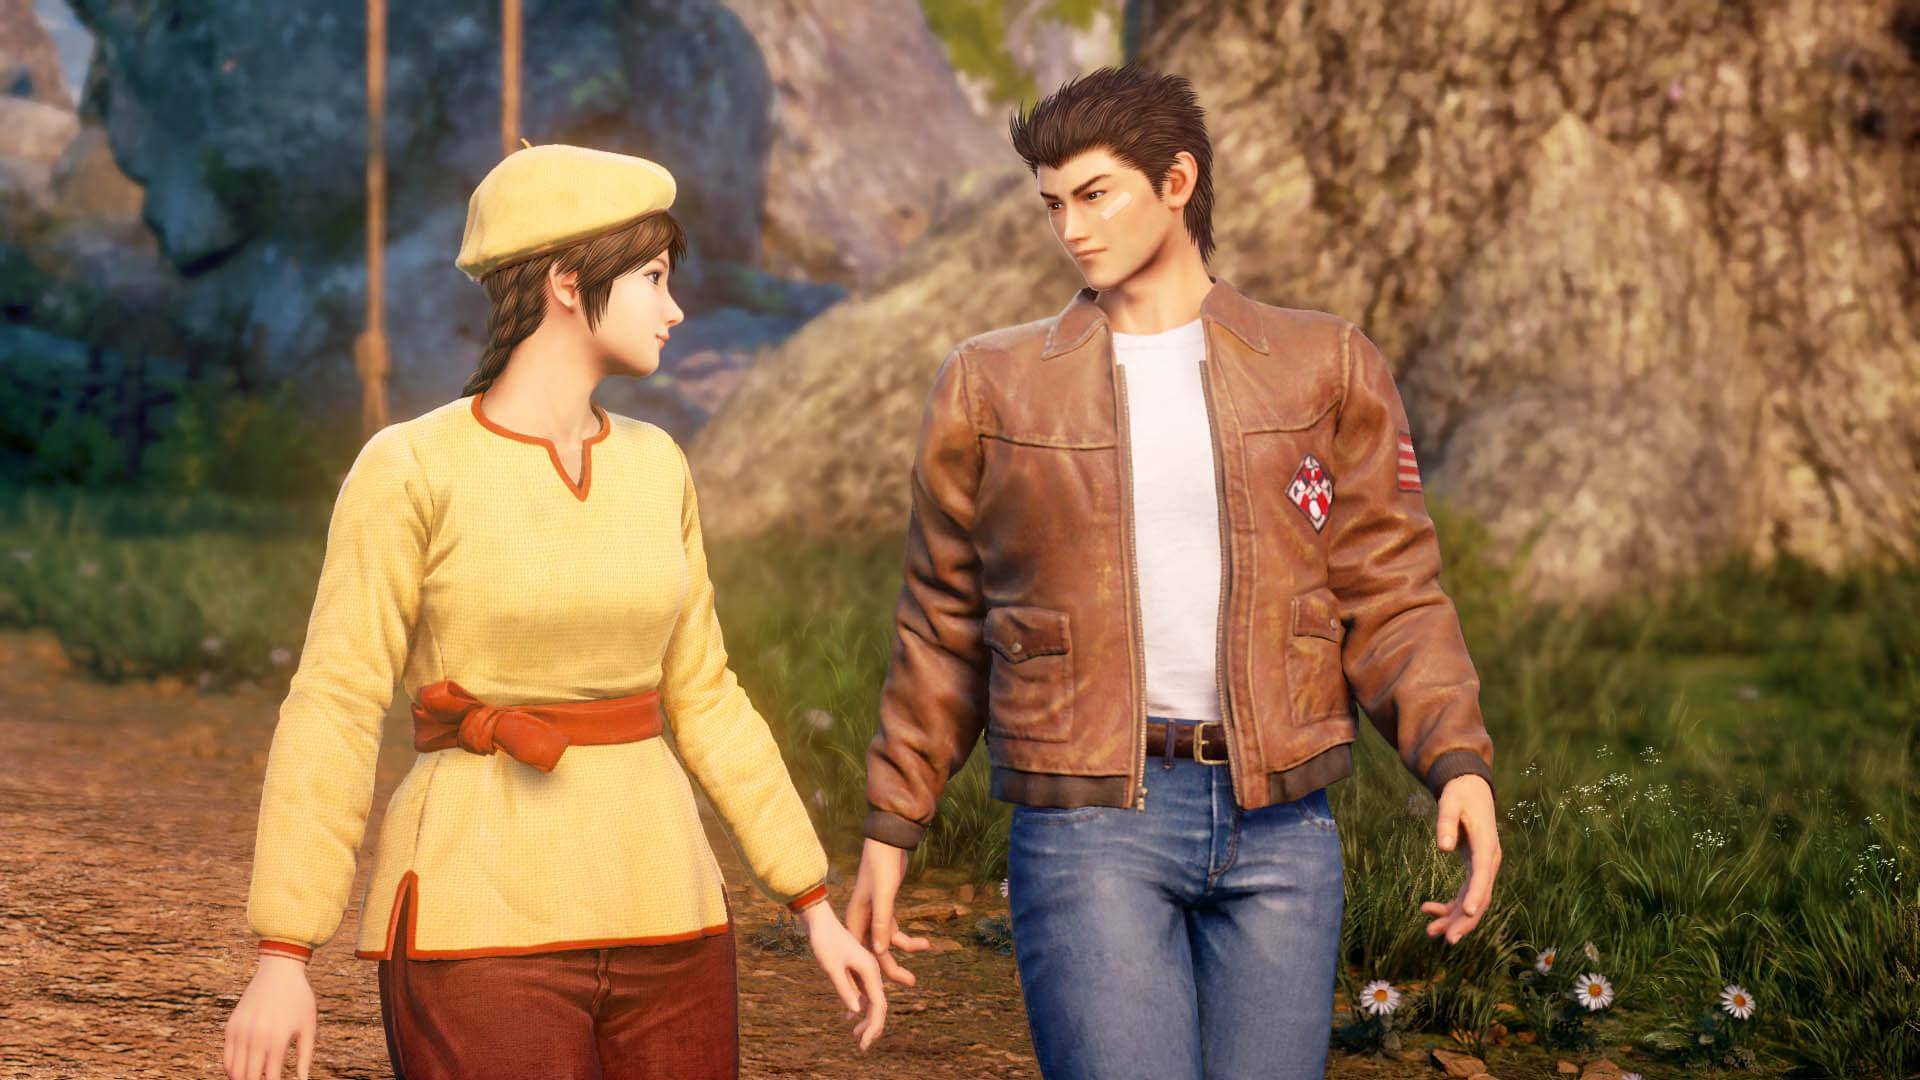 Shenmue III launch trailer is out!